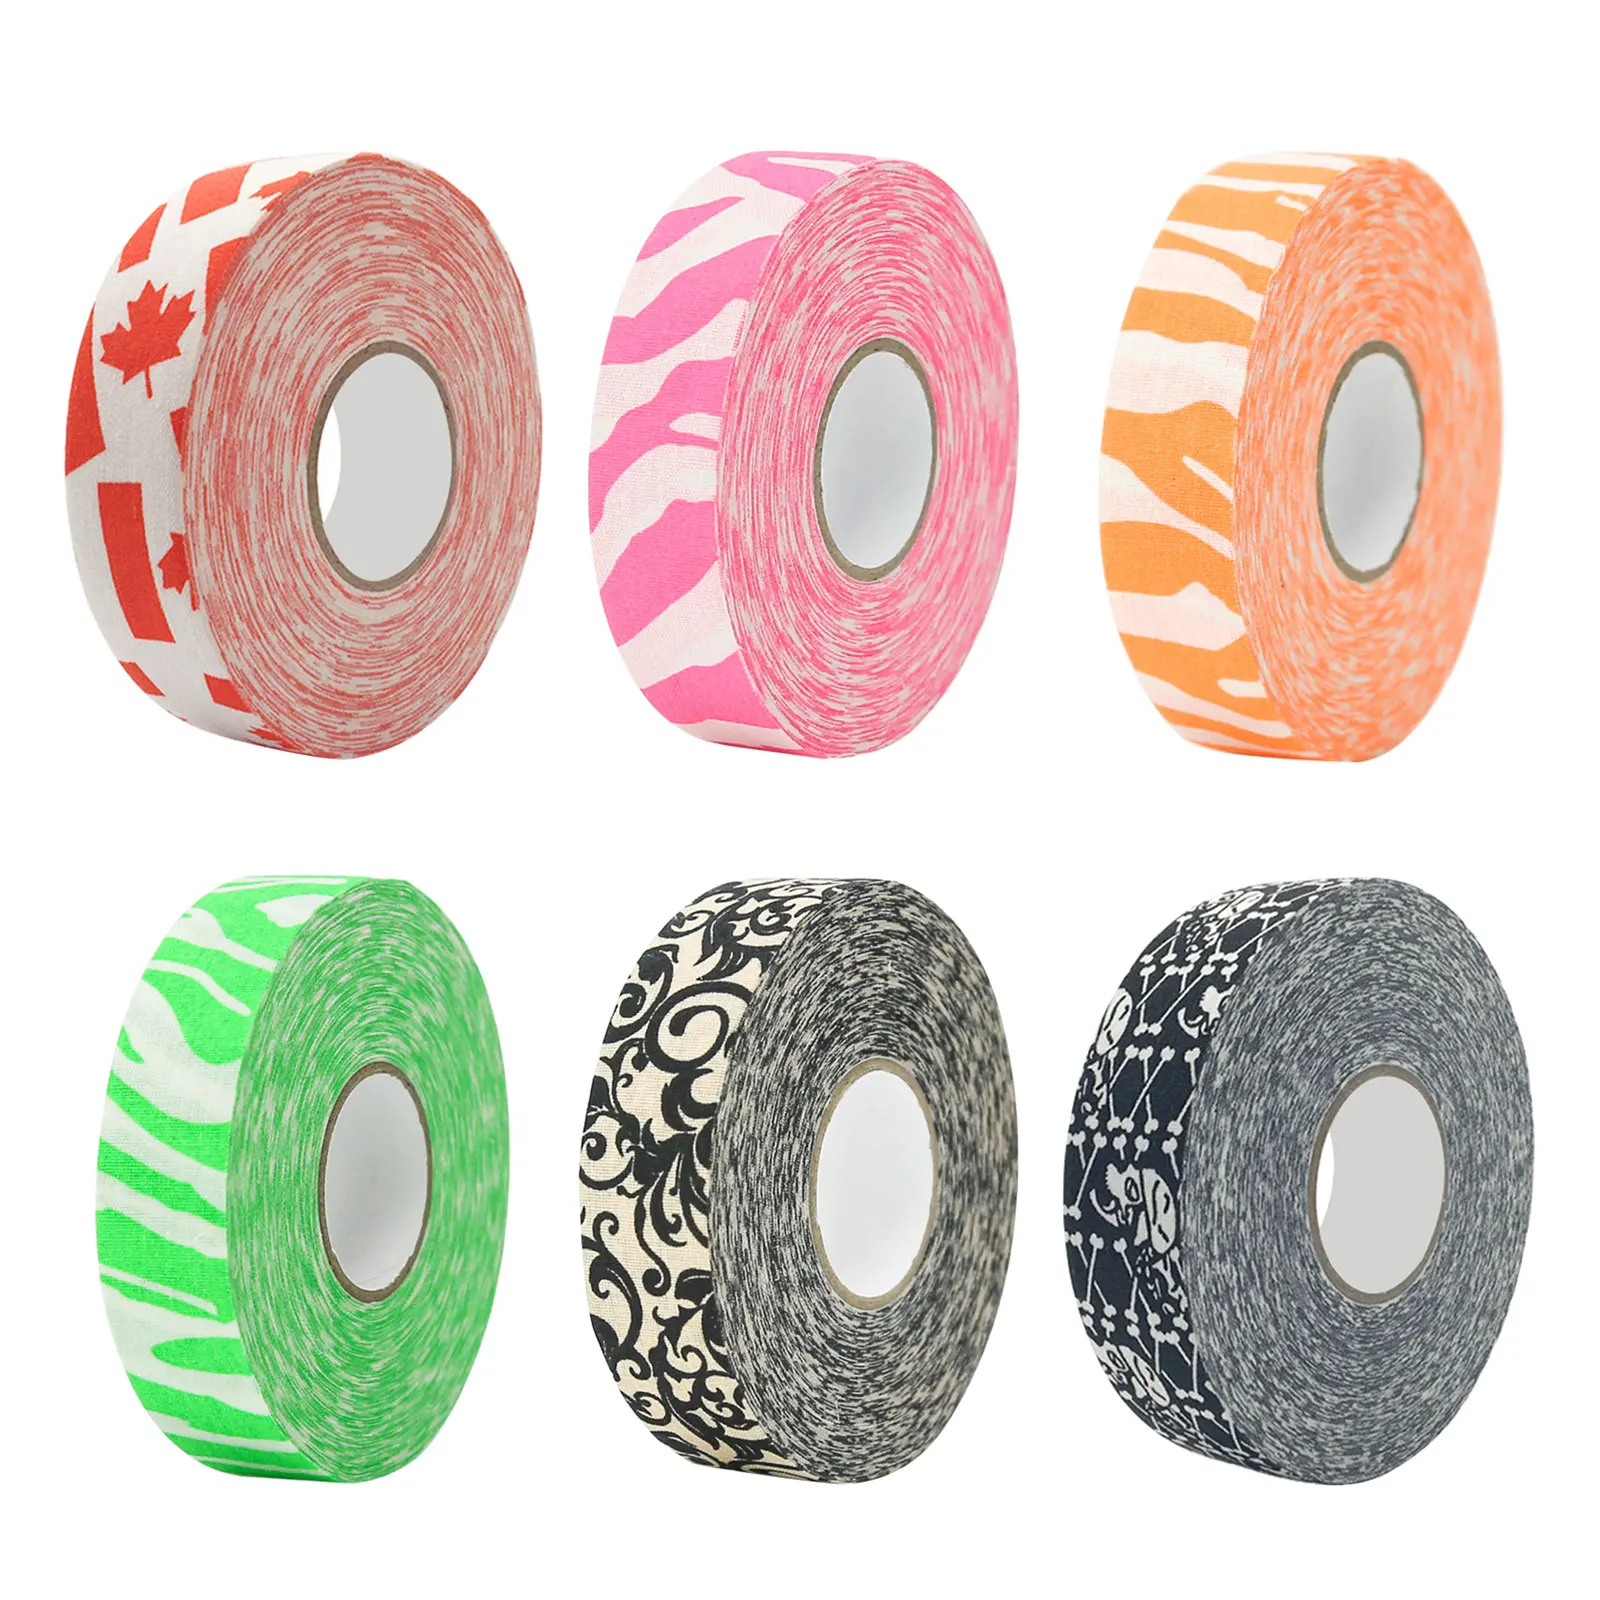 

Hockey Stick Tape Wear-Resistant Colorful Sport Safety Cotton Cloth Waterproof Ice Field Hockey Badminton Golf Tape Roll